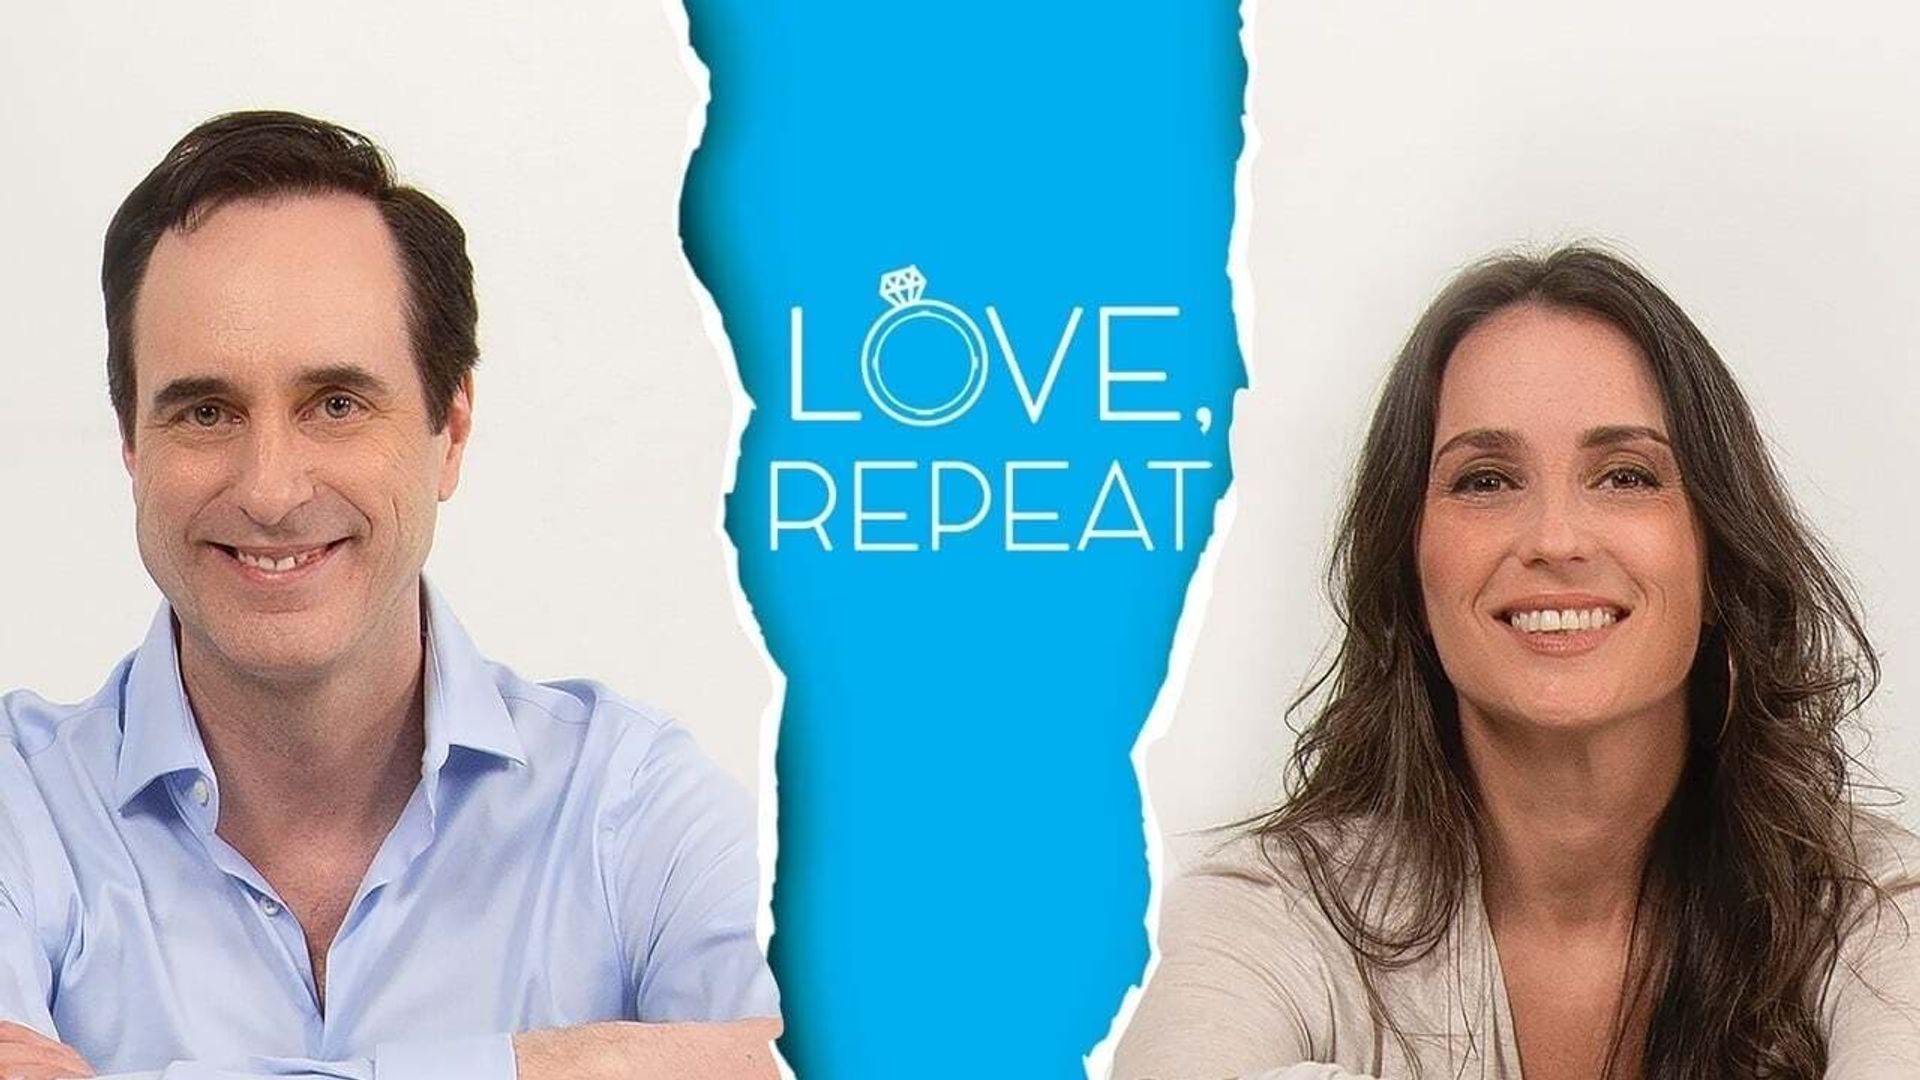 Love, Repeat background